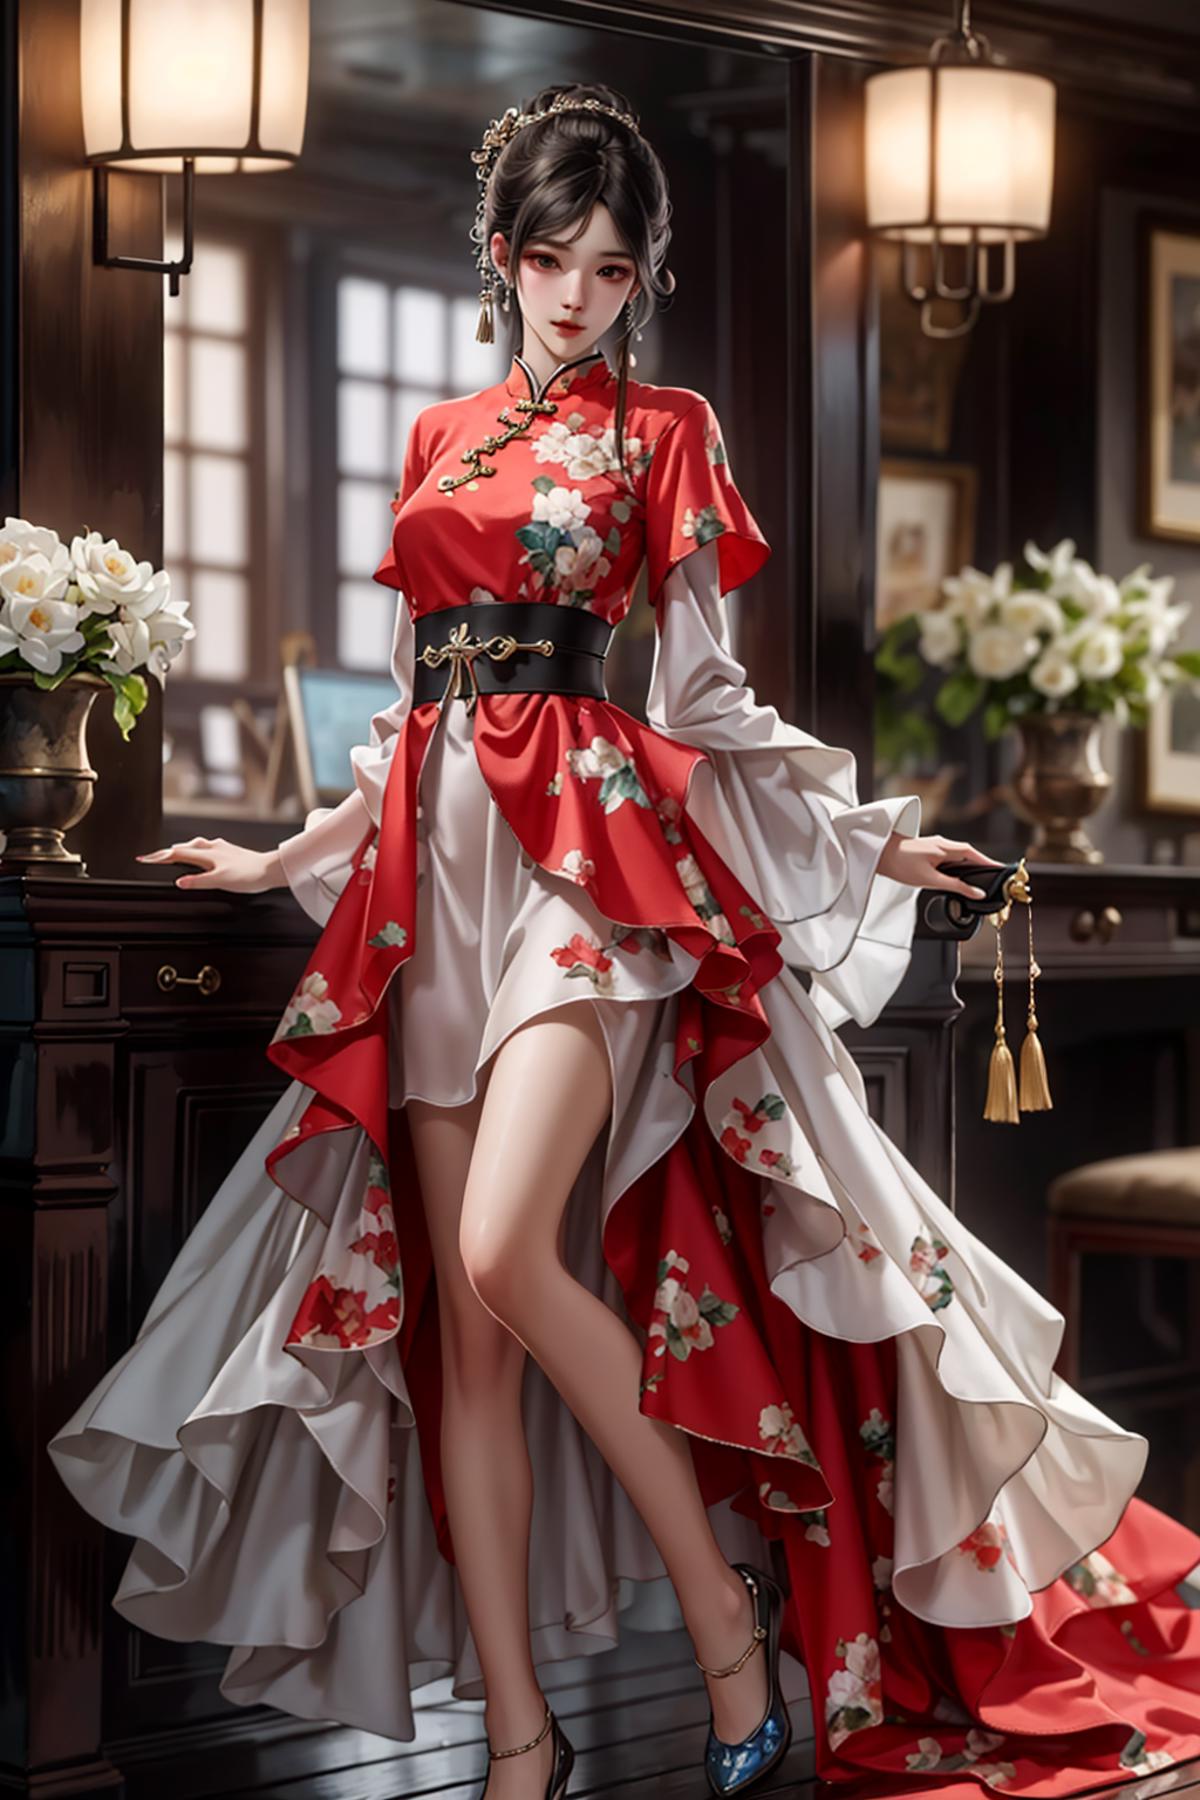 New Chinese Style Suit（新中式服饰）LoRa image by affa1988